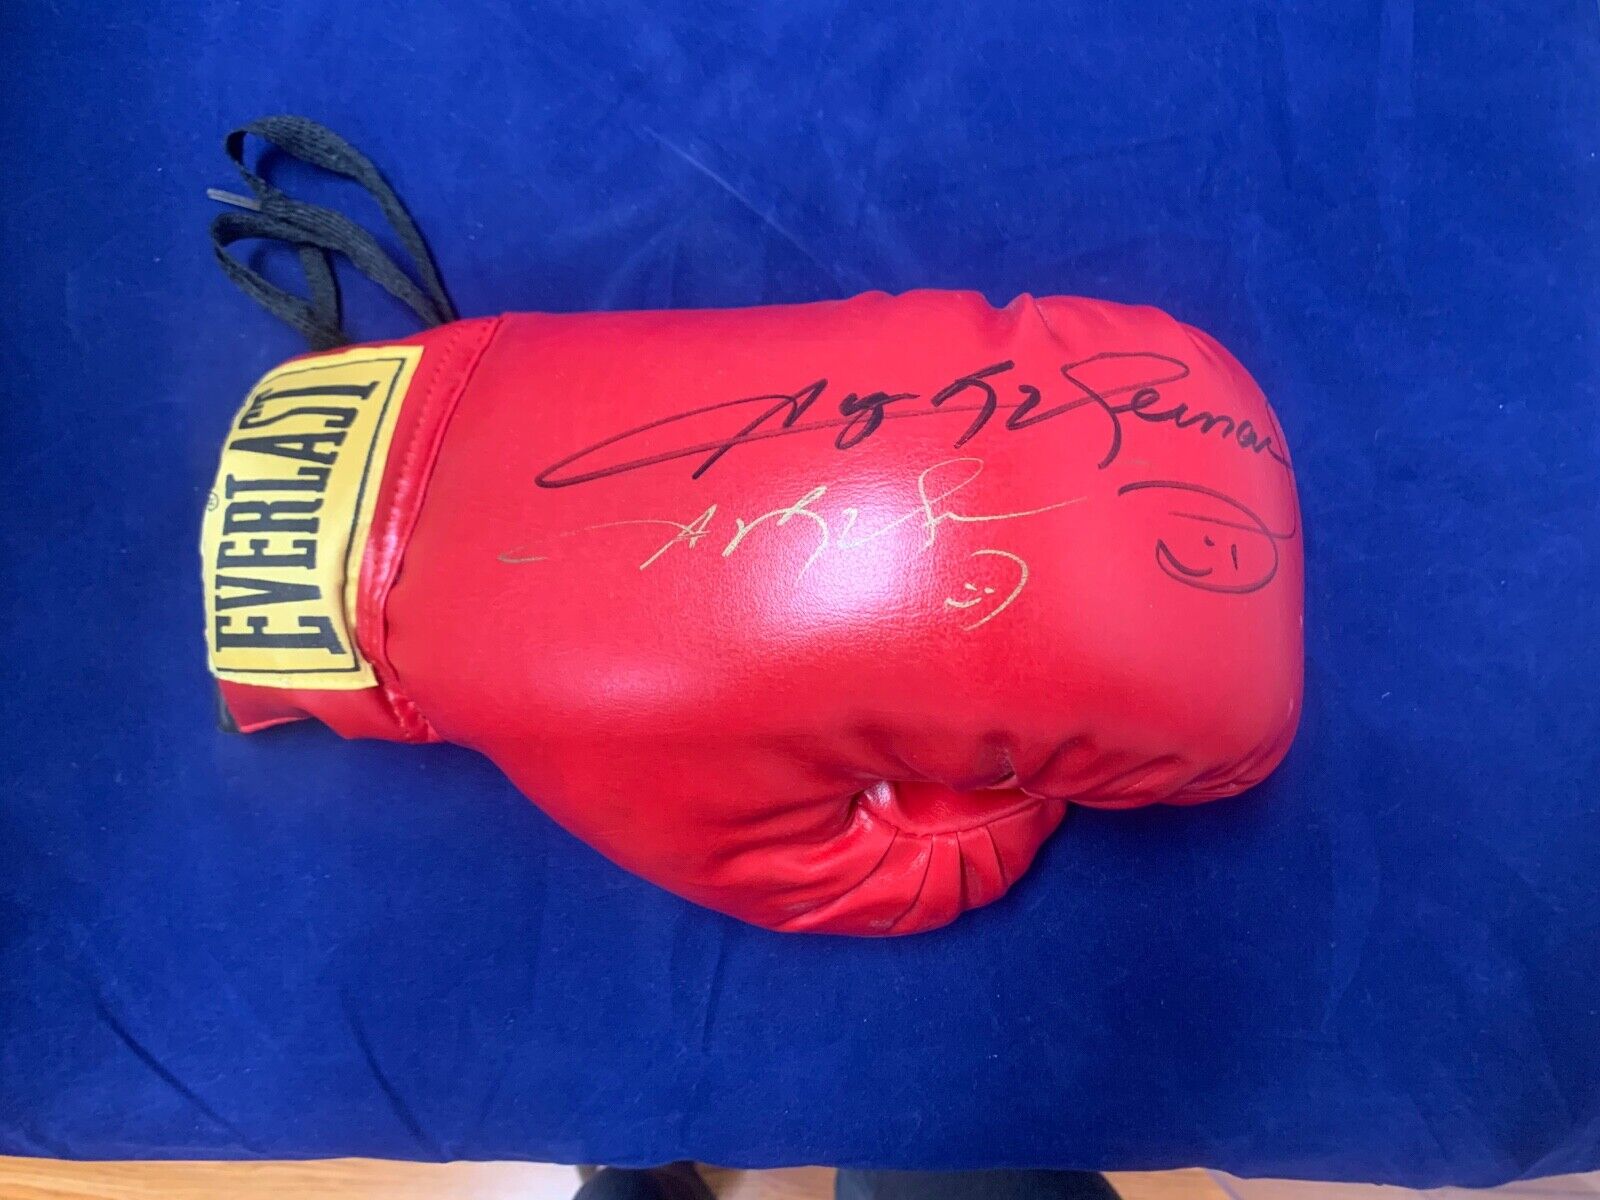 Sugar Ray Leonard Autographed Twice on Everlast Boxing Glove in Very Good Cond.